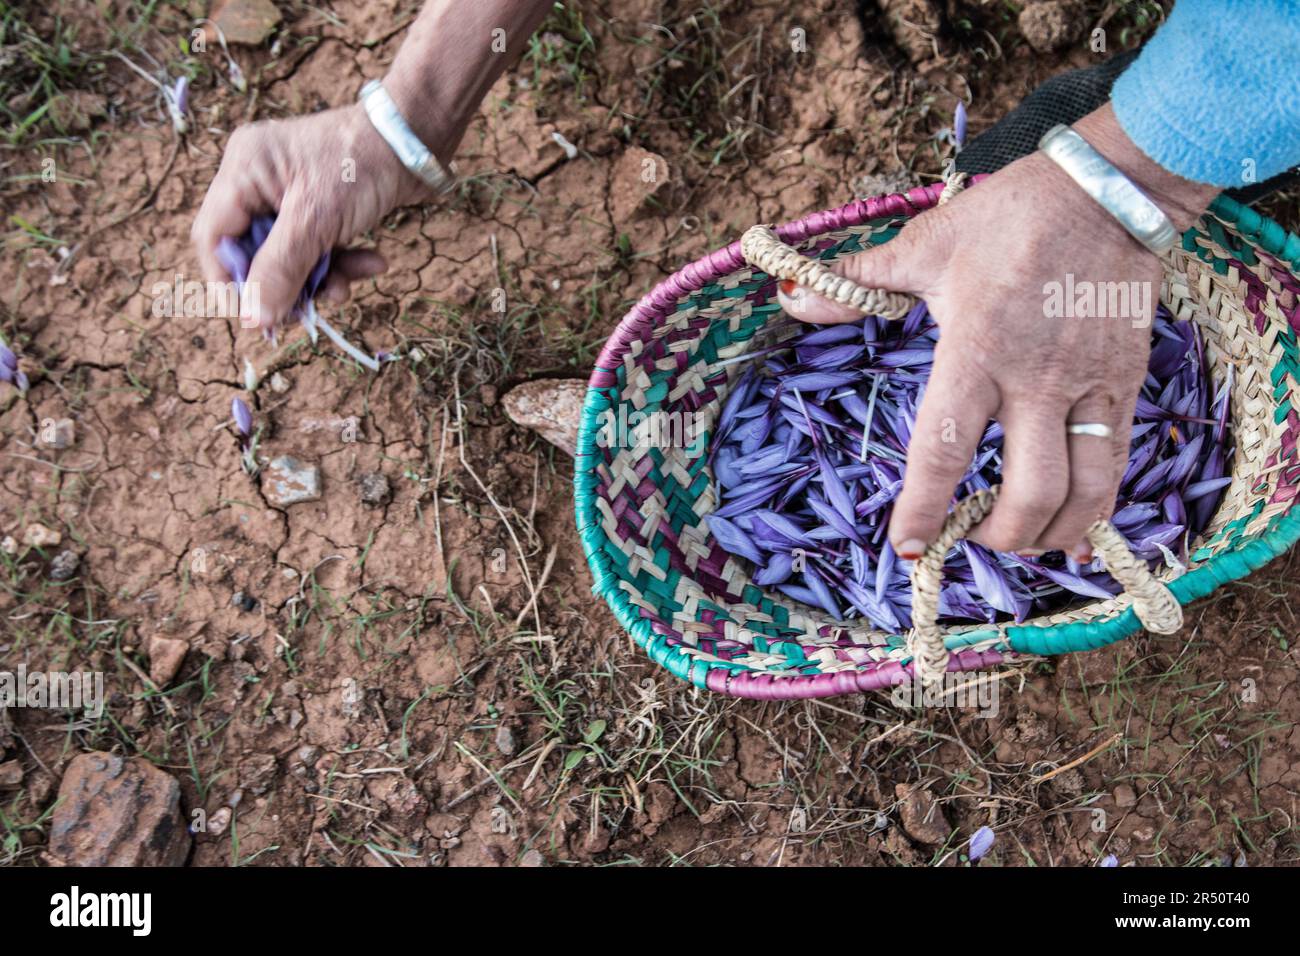 Dawn's Early Light Saffron Flower Harvest by Women Growers in Taliouine, Southern Morocco Stock Photo